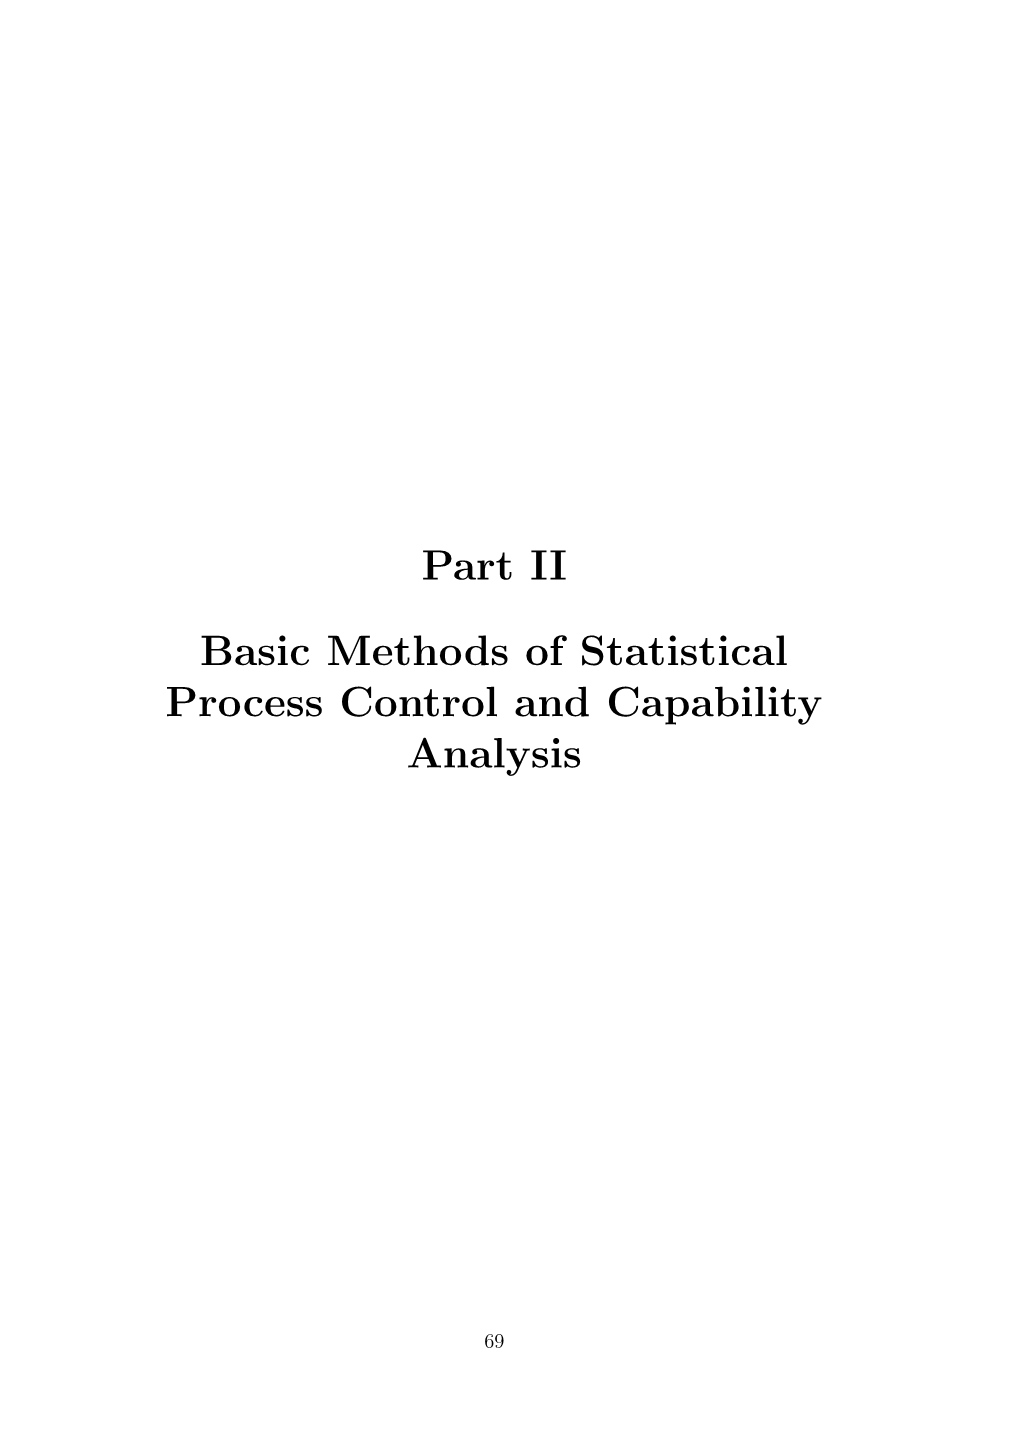 Part II Basic Methods of Statistical Process Control and Capability